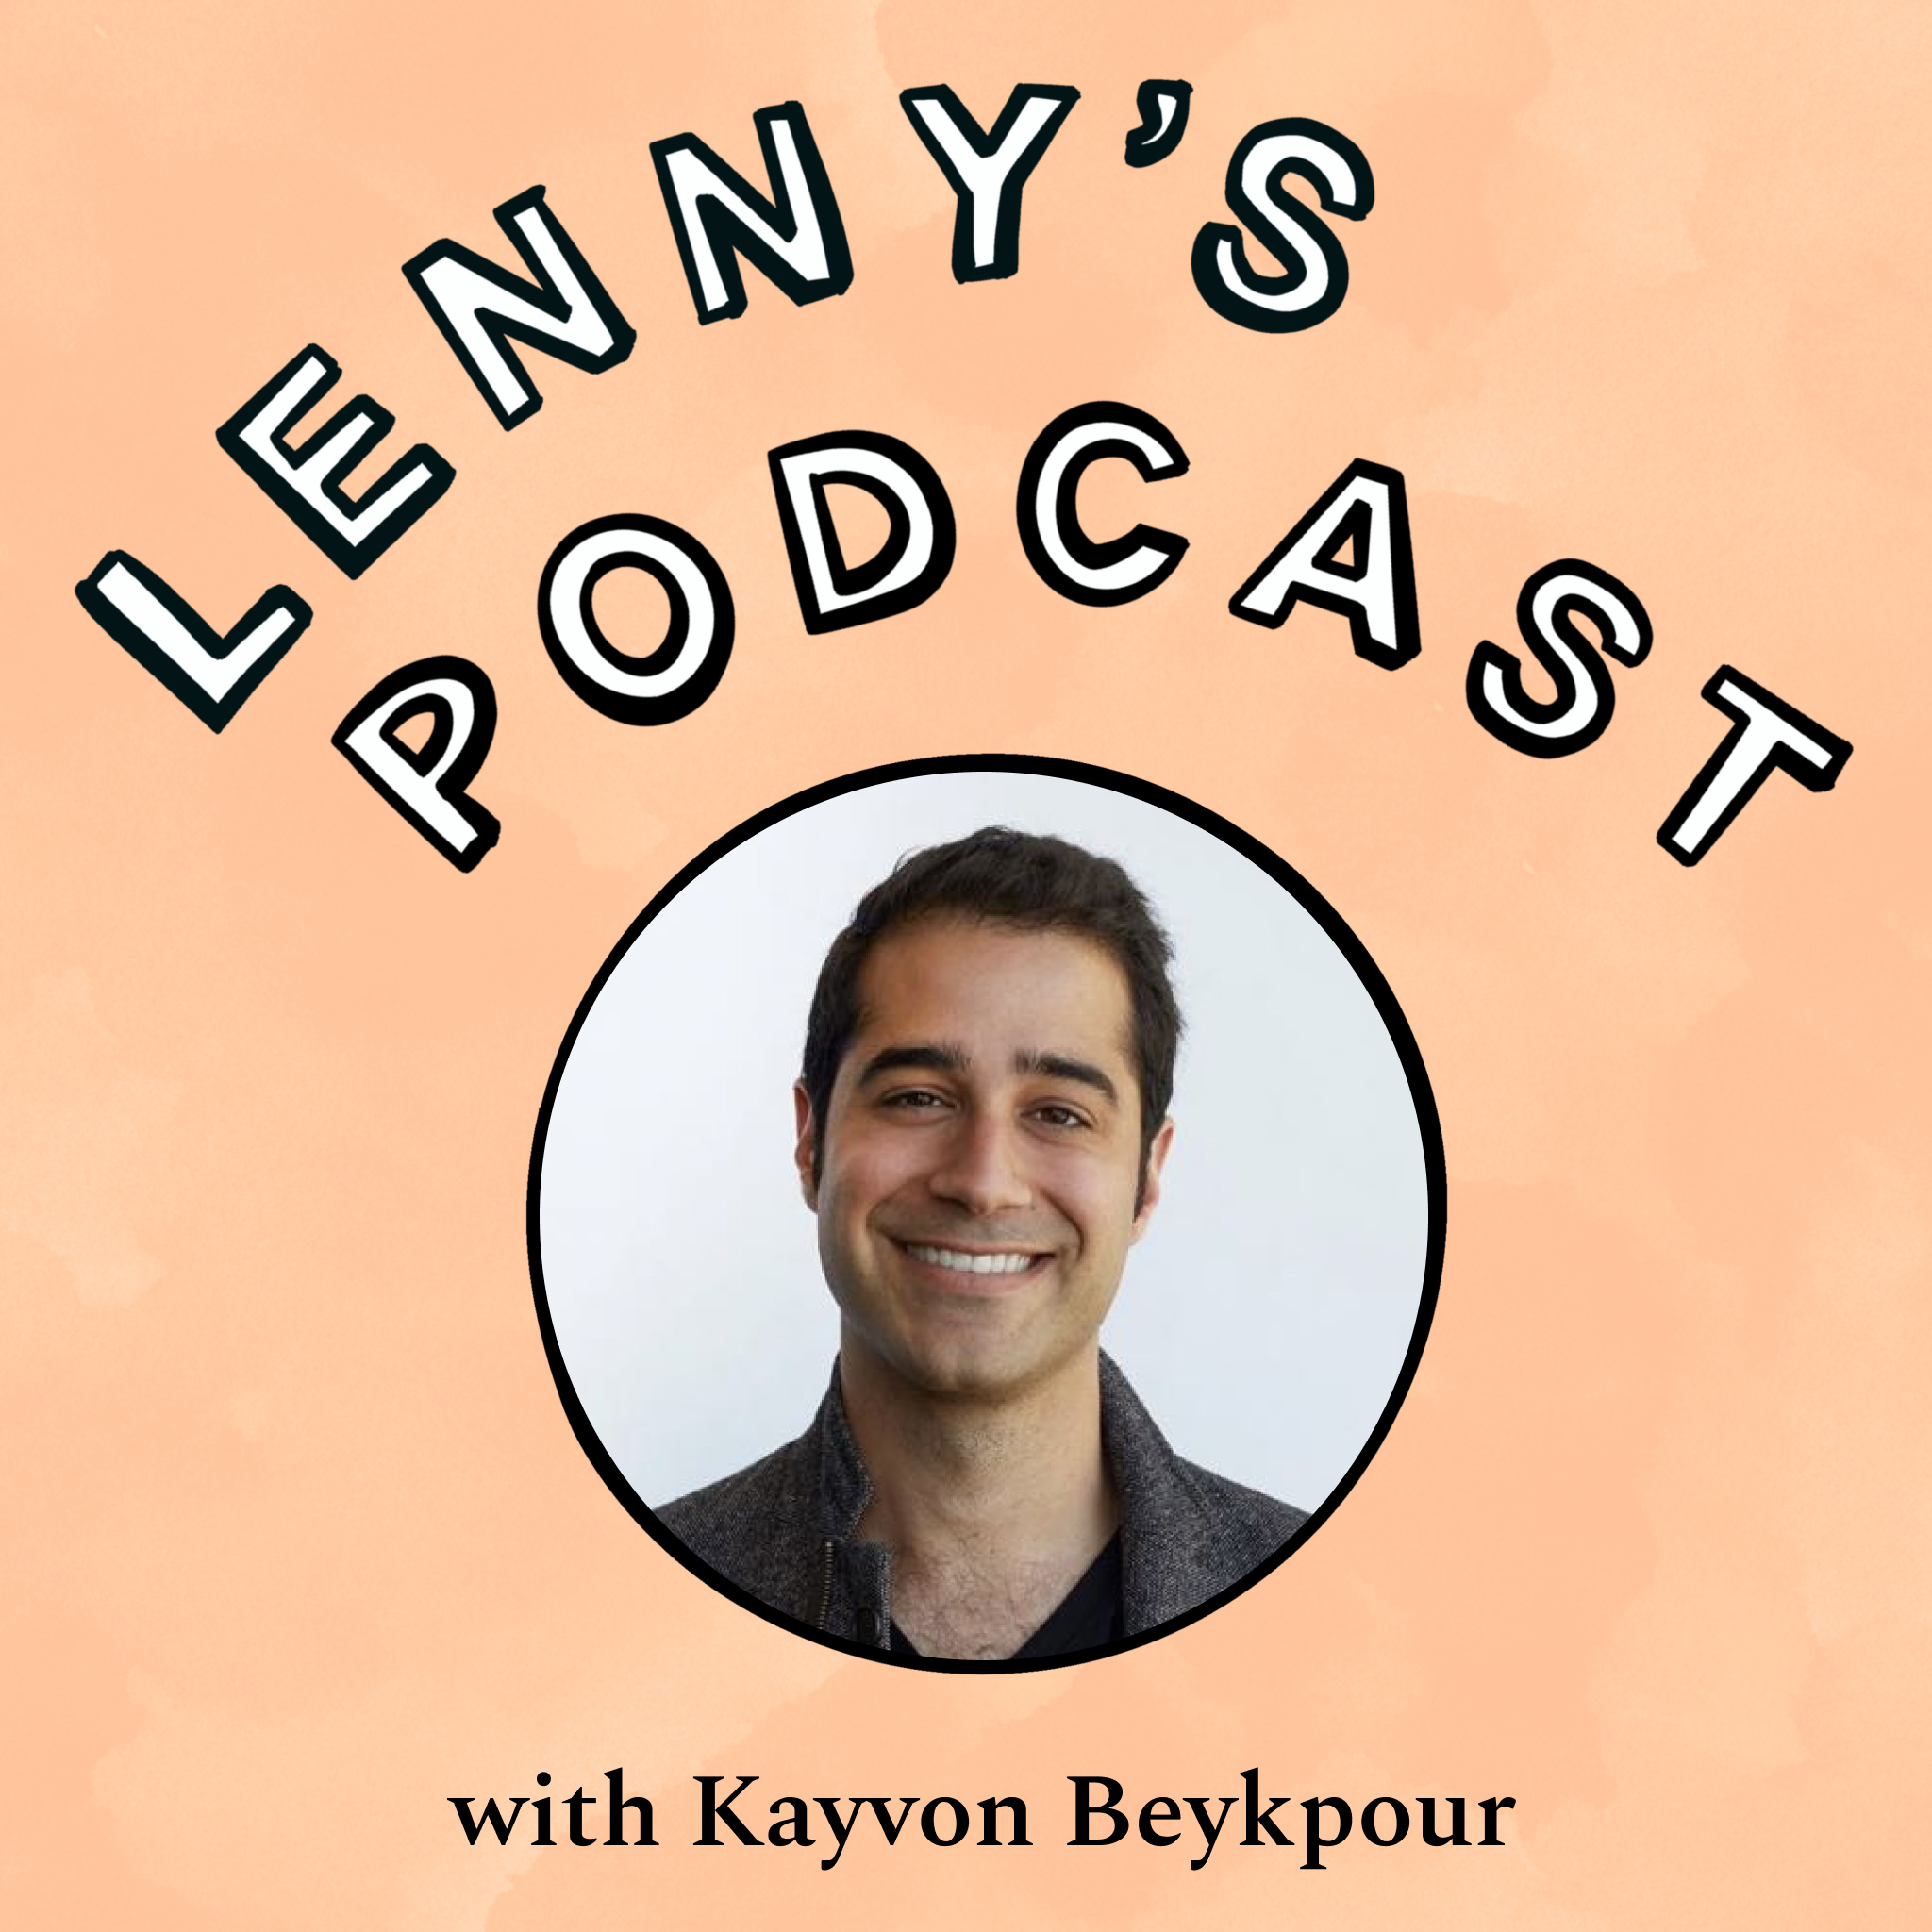 Twitter’s former Head of Product opens up: being fired, meeting Elon, changing stagnant culture, building consumer product, more | Kayvon Beykpour